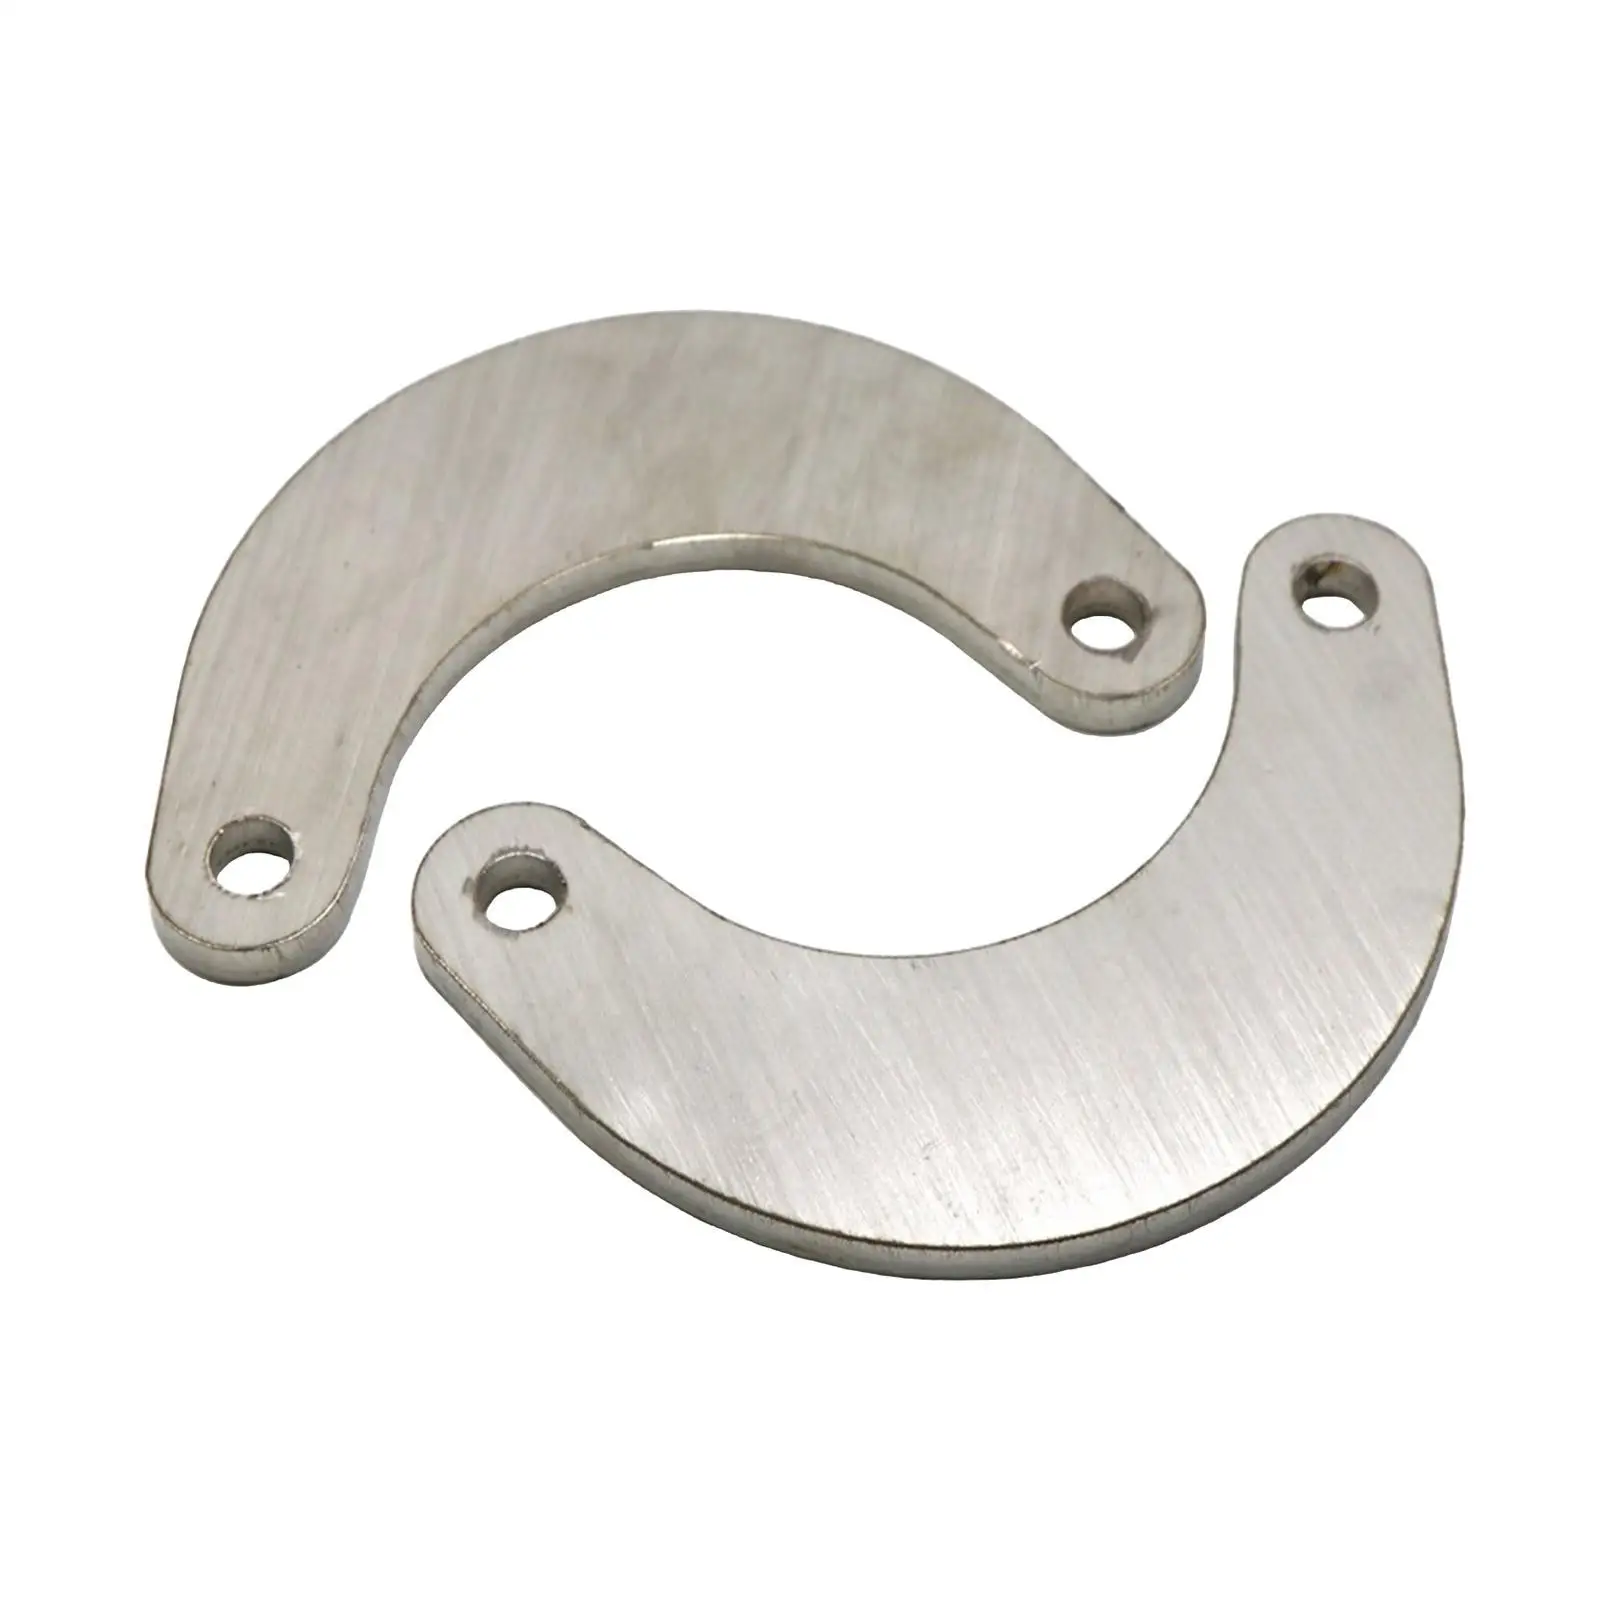 Stainless Steel Lowering Links  Lower the Body and Lower the AdjustmentFits for  MT-15  2015 Replace Modification Parts